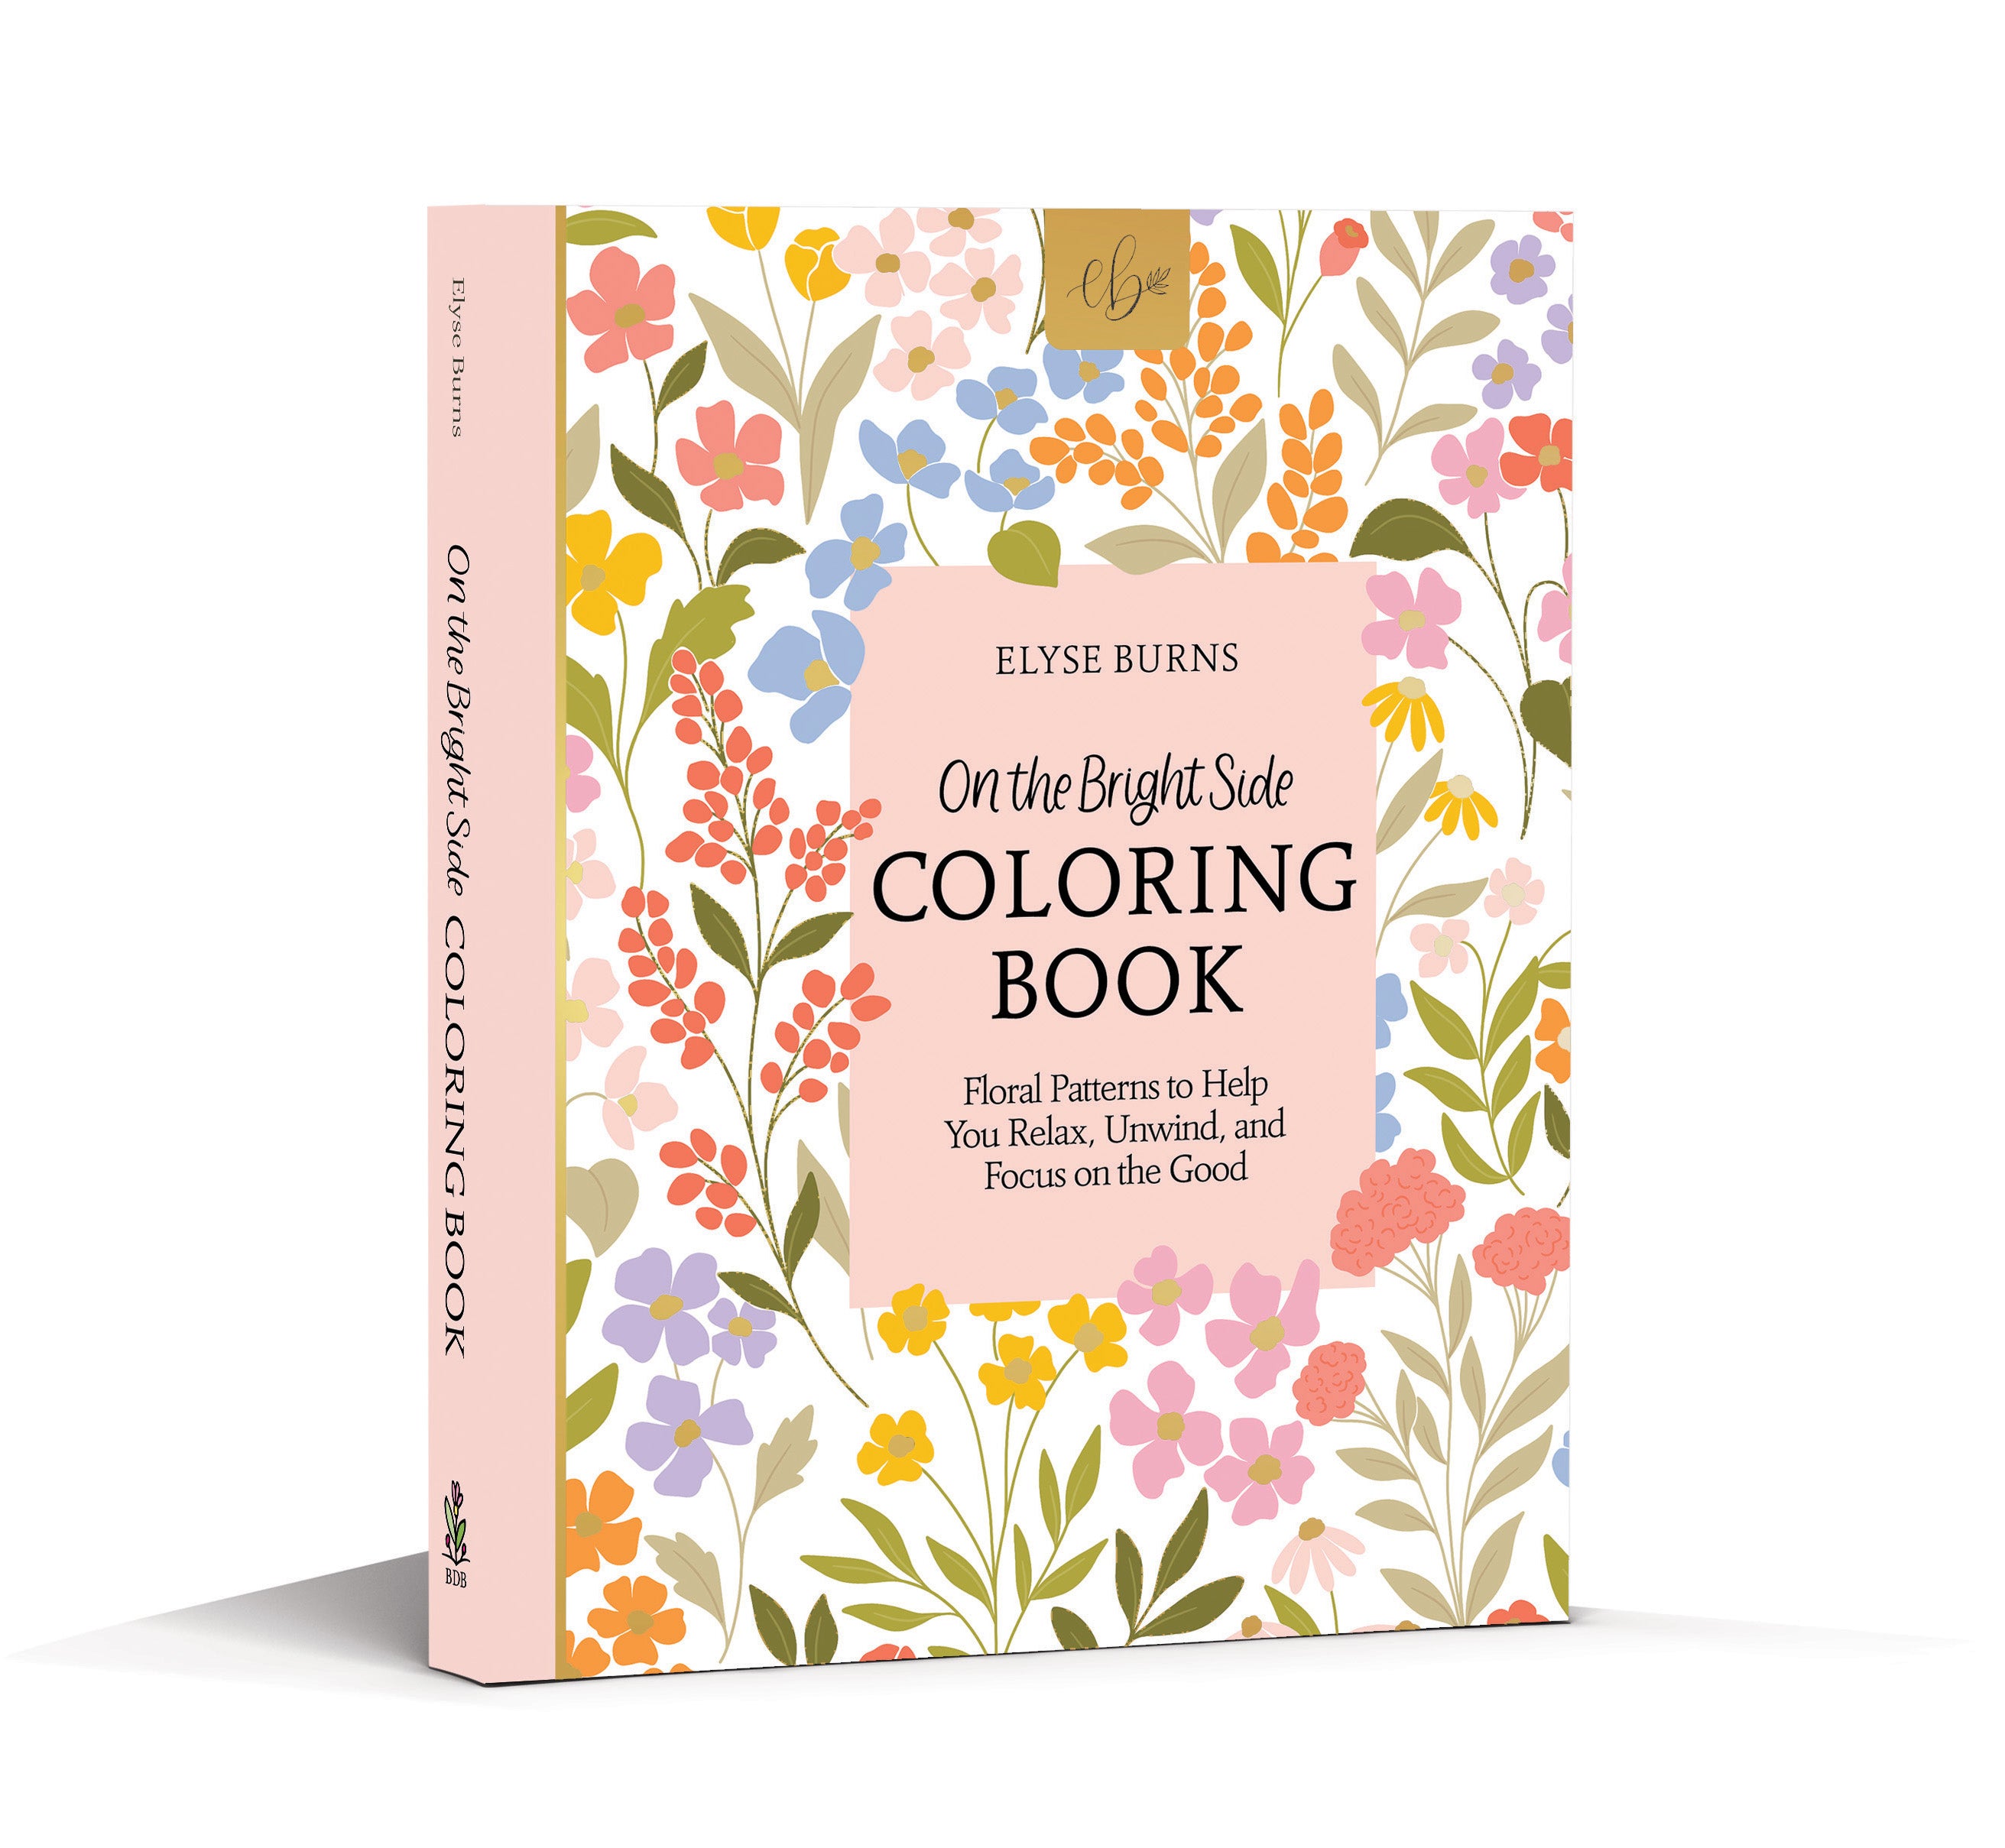 https://cdn.shopify.com/s/files/1/0436/4484/6230/products/OntheBrightSideColoringBook_Cover3D978-0-7643-6661-1.jpg?v=1677099192